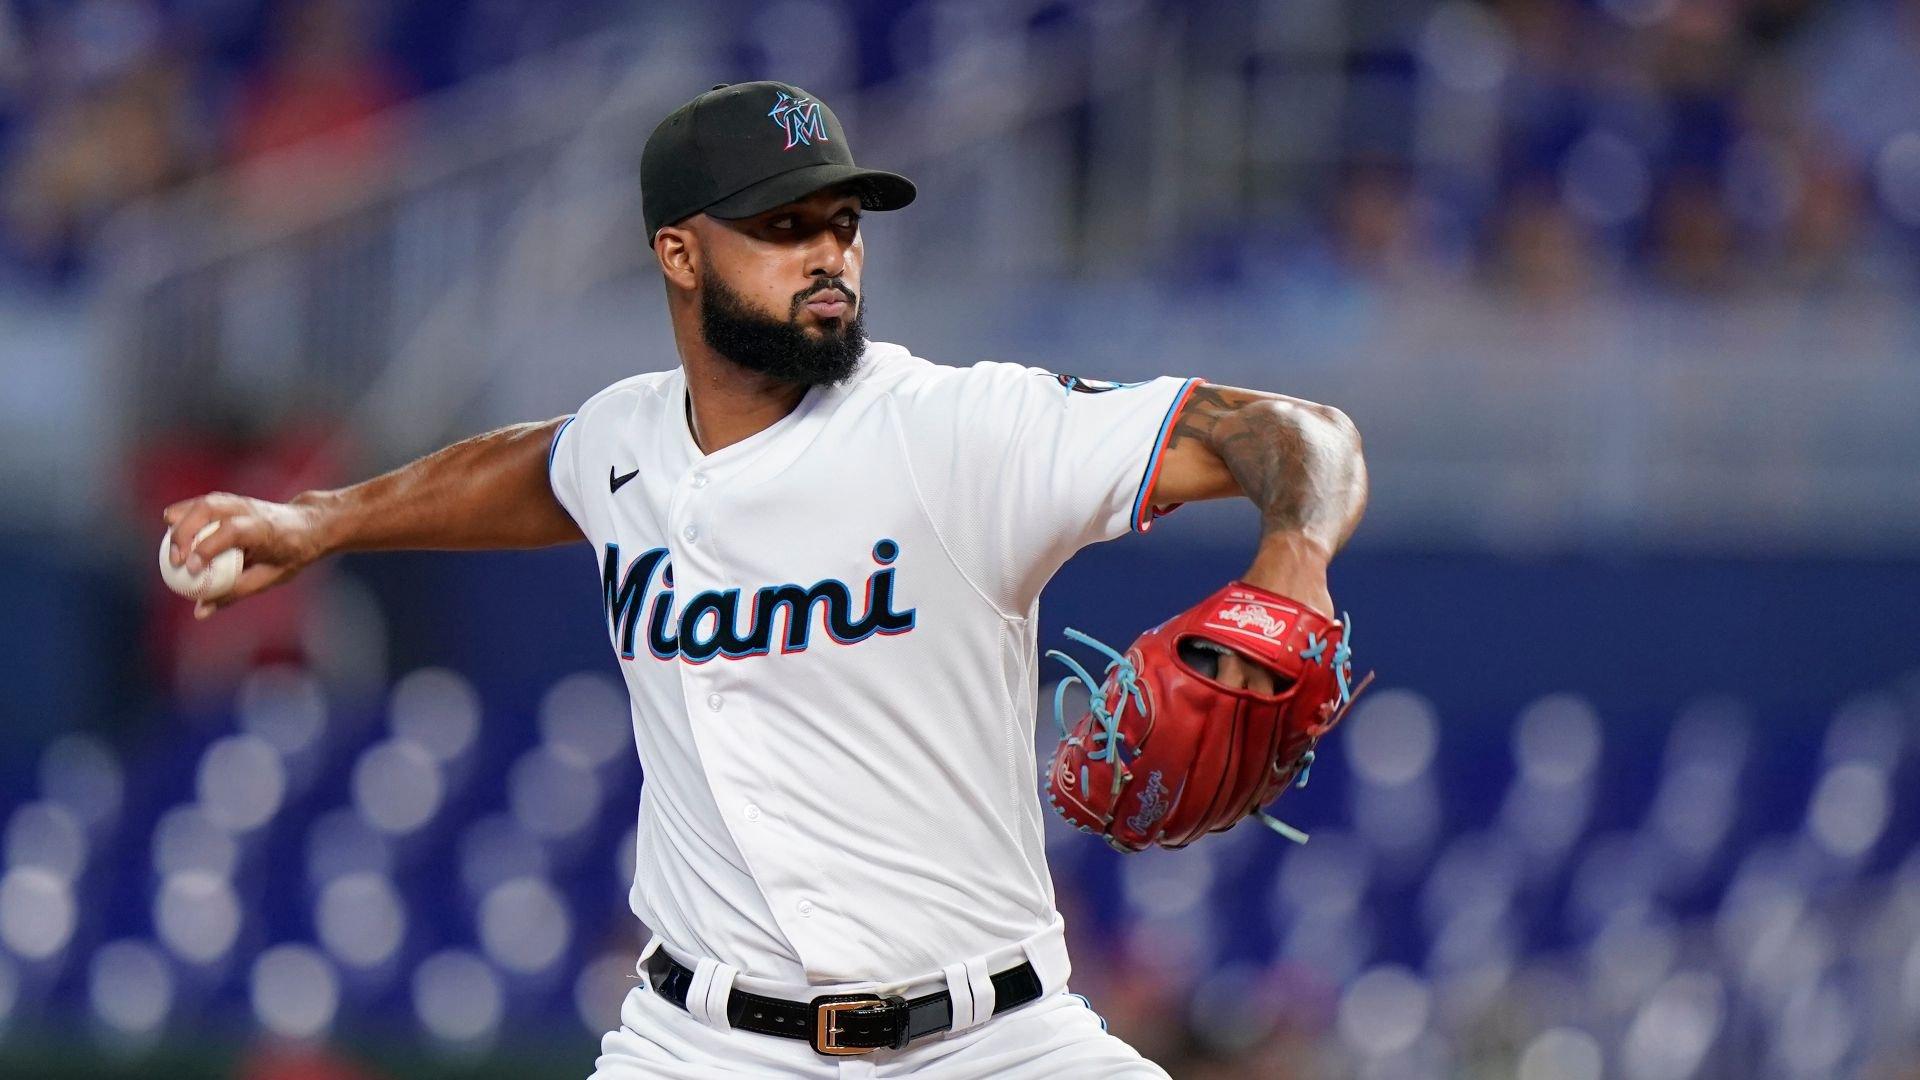 Padres vs. Marlins (August 15): Will NL Cy Young favorite Alcantara shut down San Diego? cover